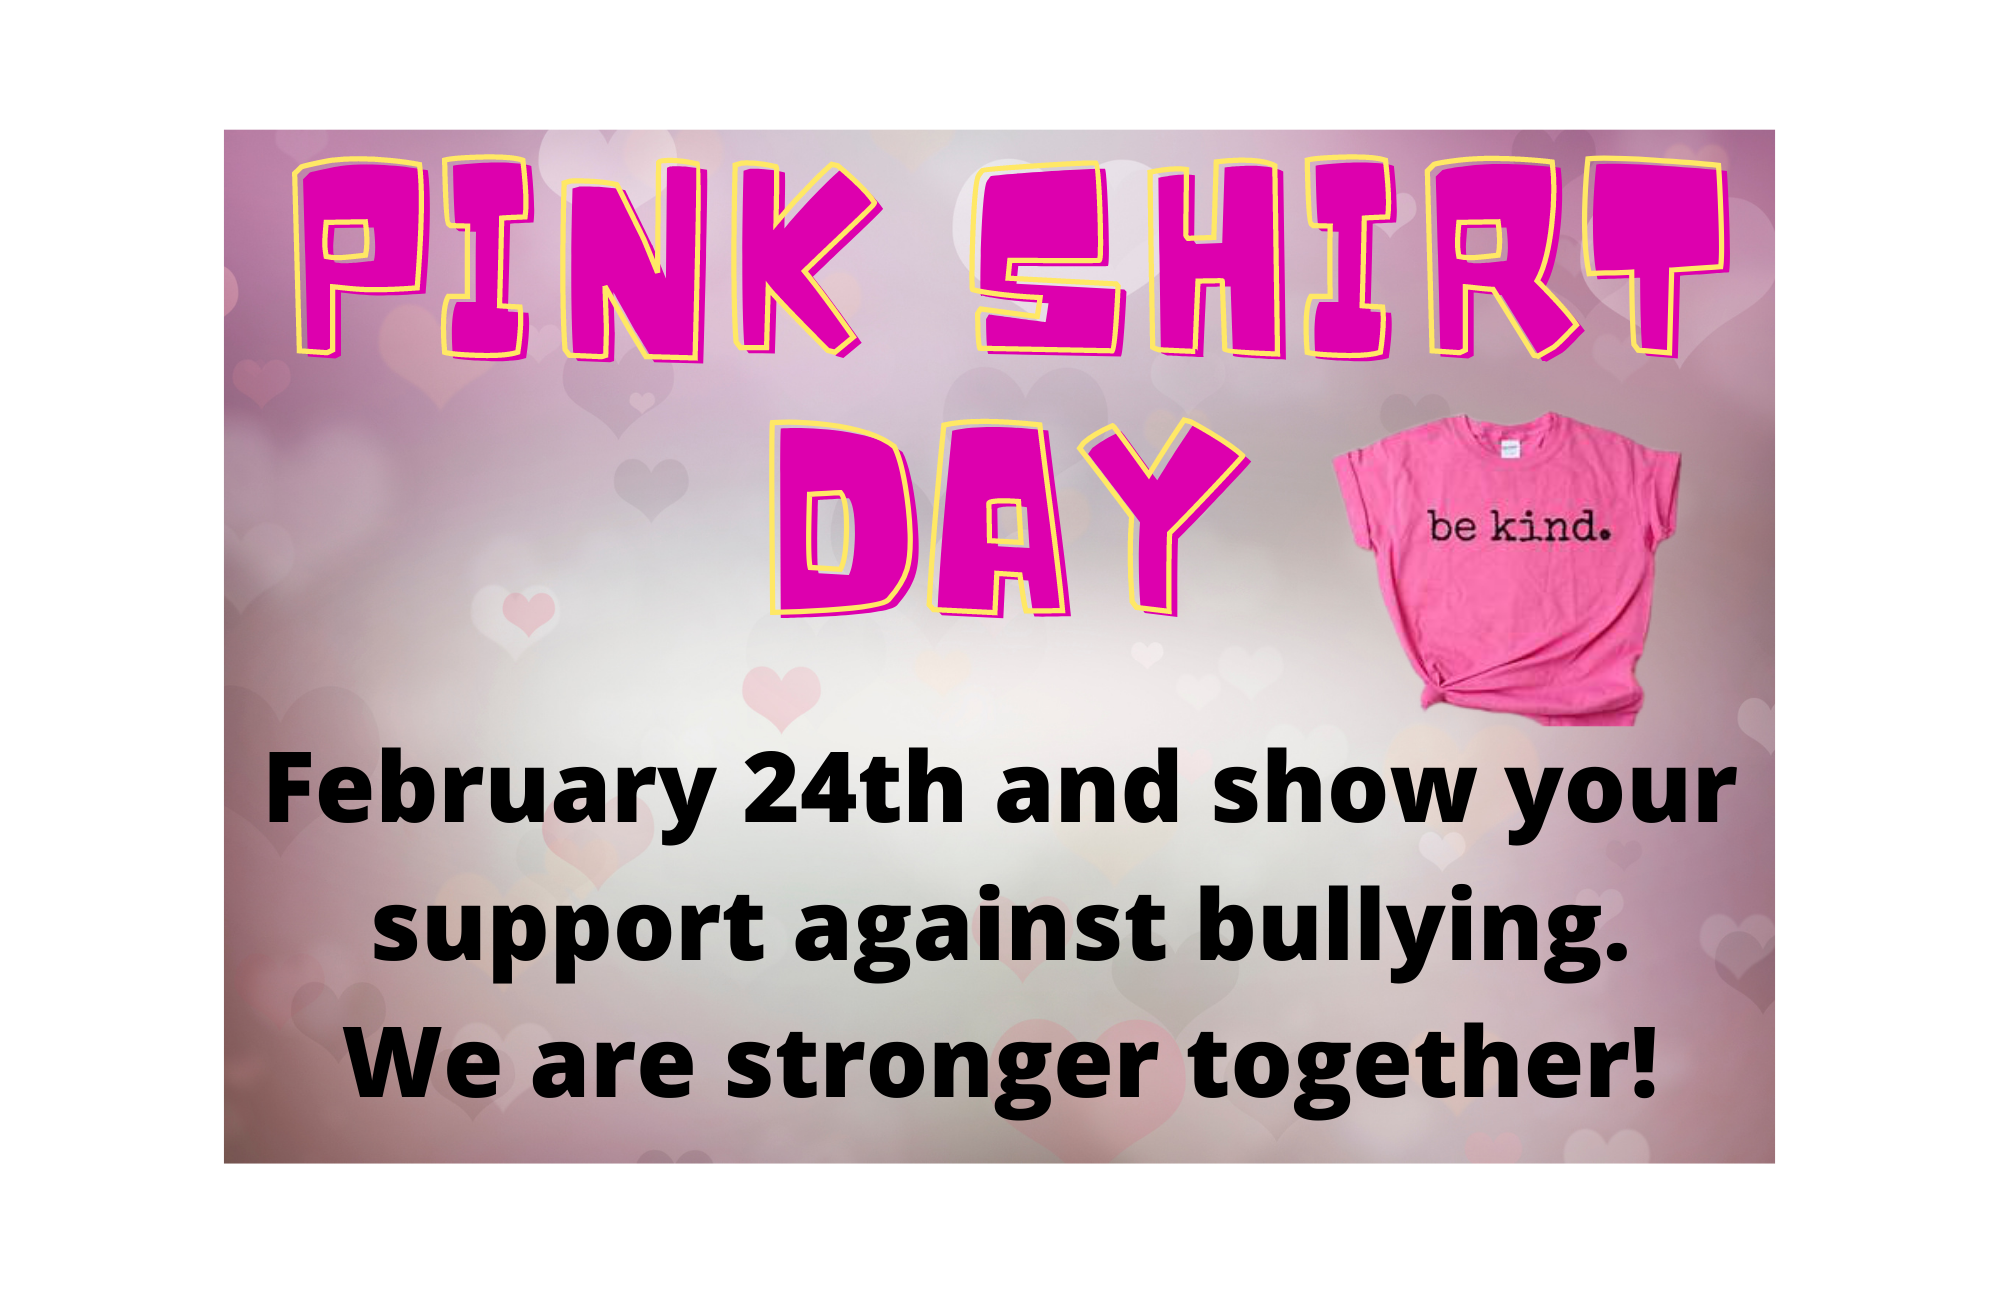 pink-shirt-day-is-being-held-on-feb-24th-wear-pink-to-show-you-care